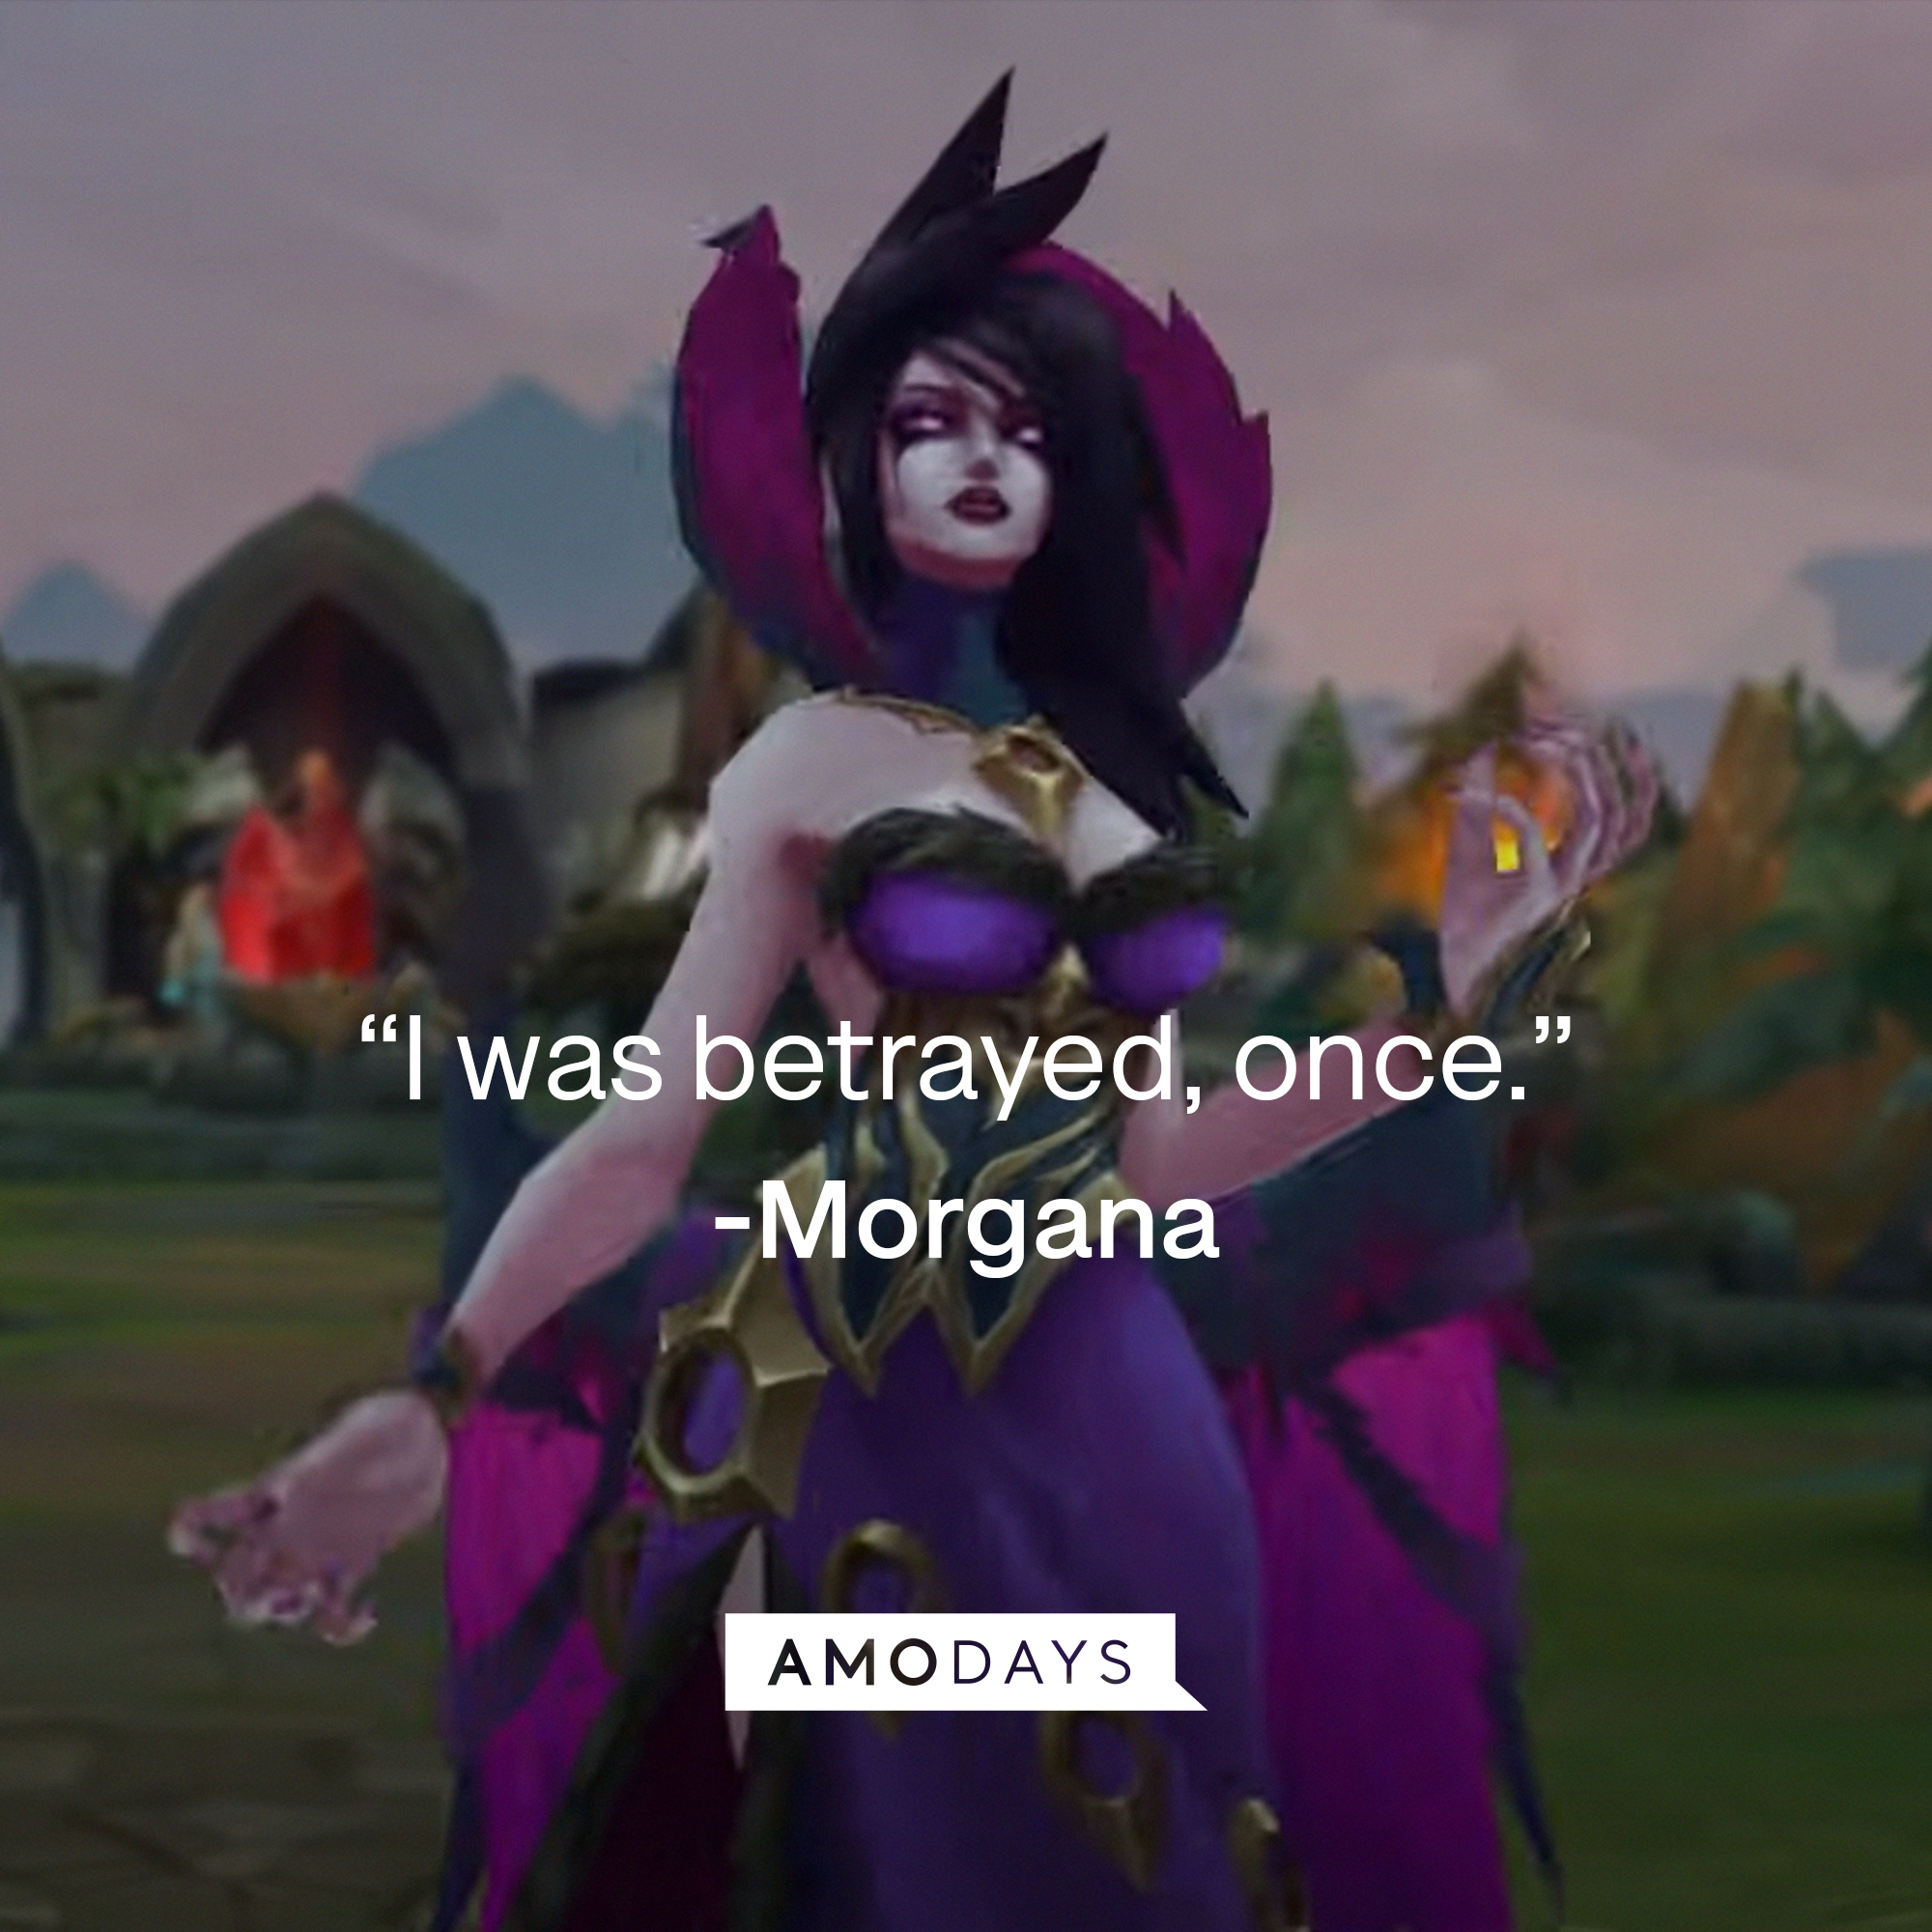 An image of Morgana, with her quote: “I was betrayed, once.” | Source: Youtube.com/leagueoflegend